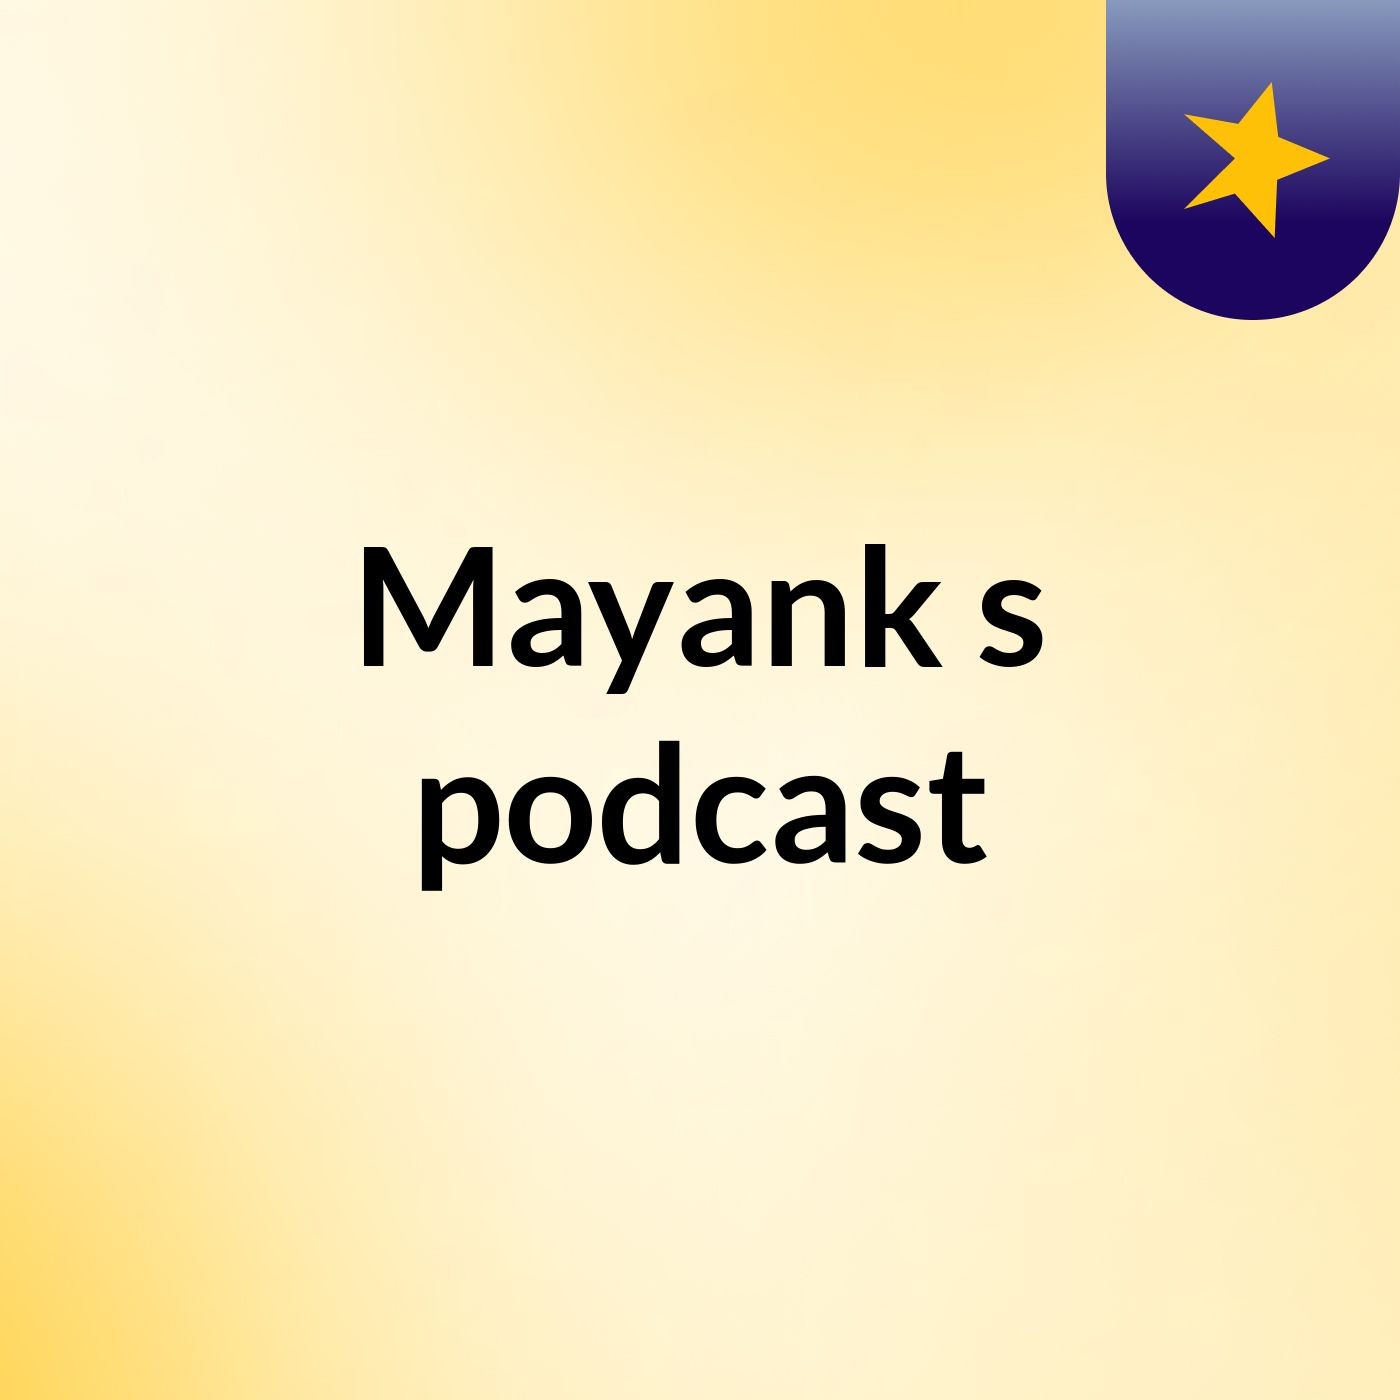 Episode 3 - Mayank's podcast